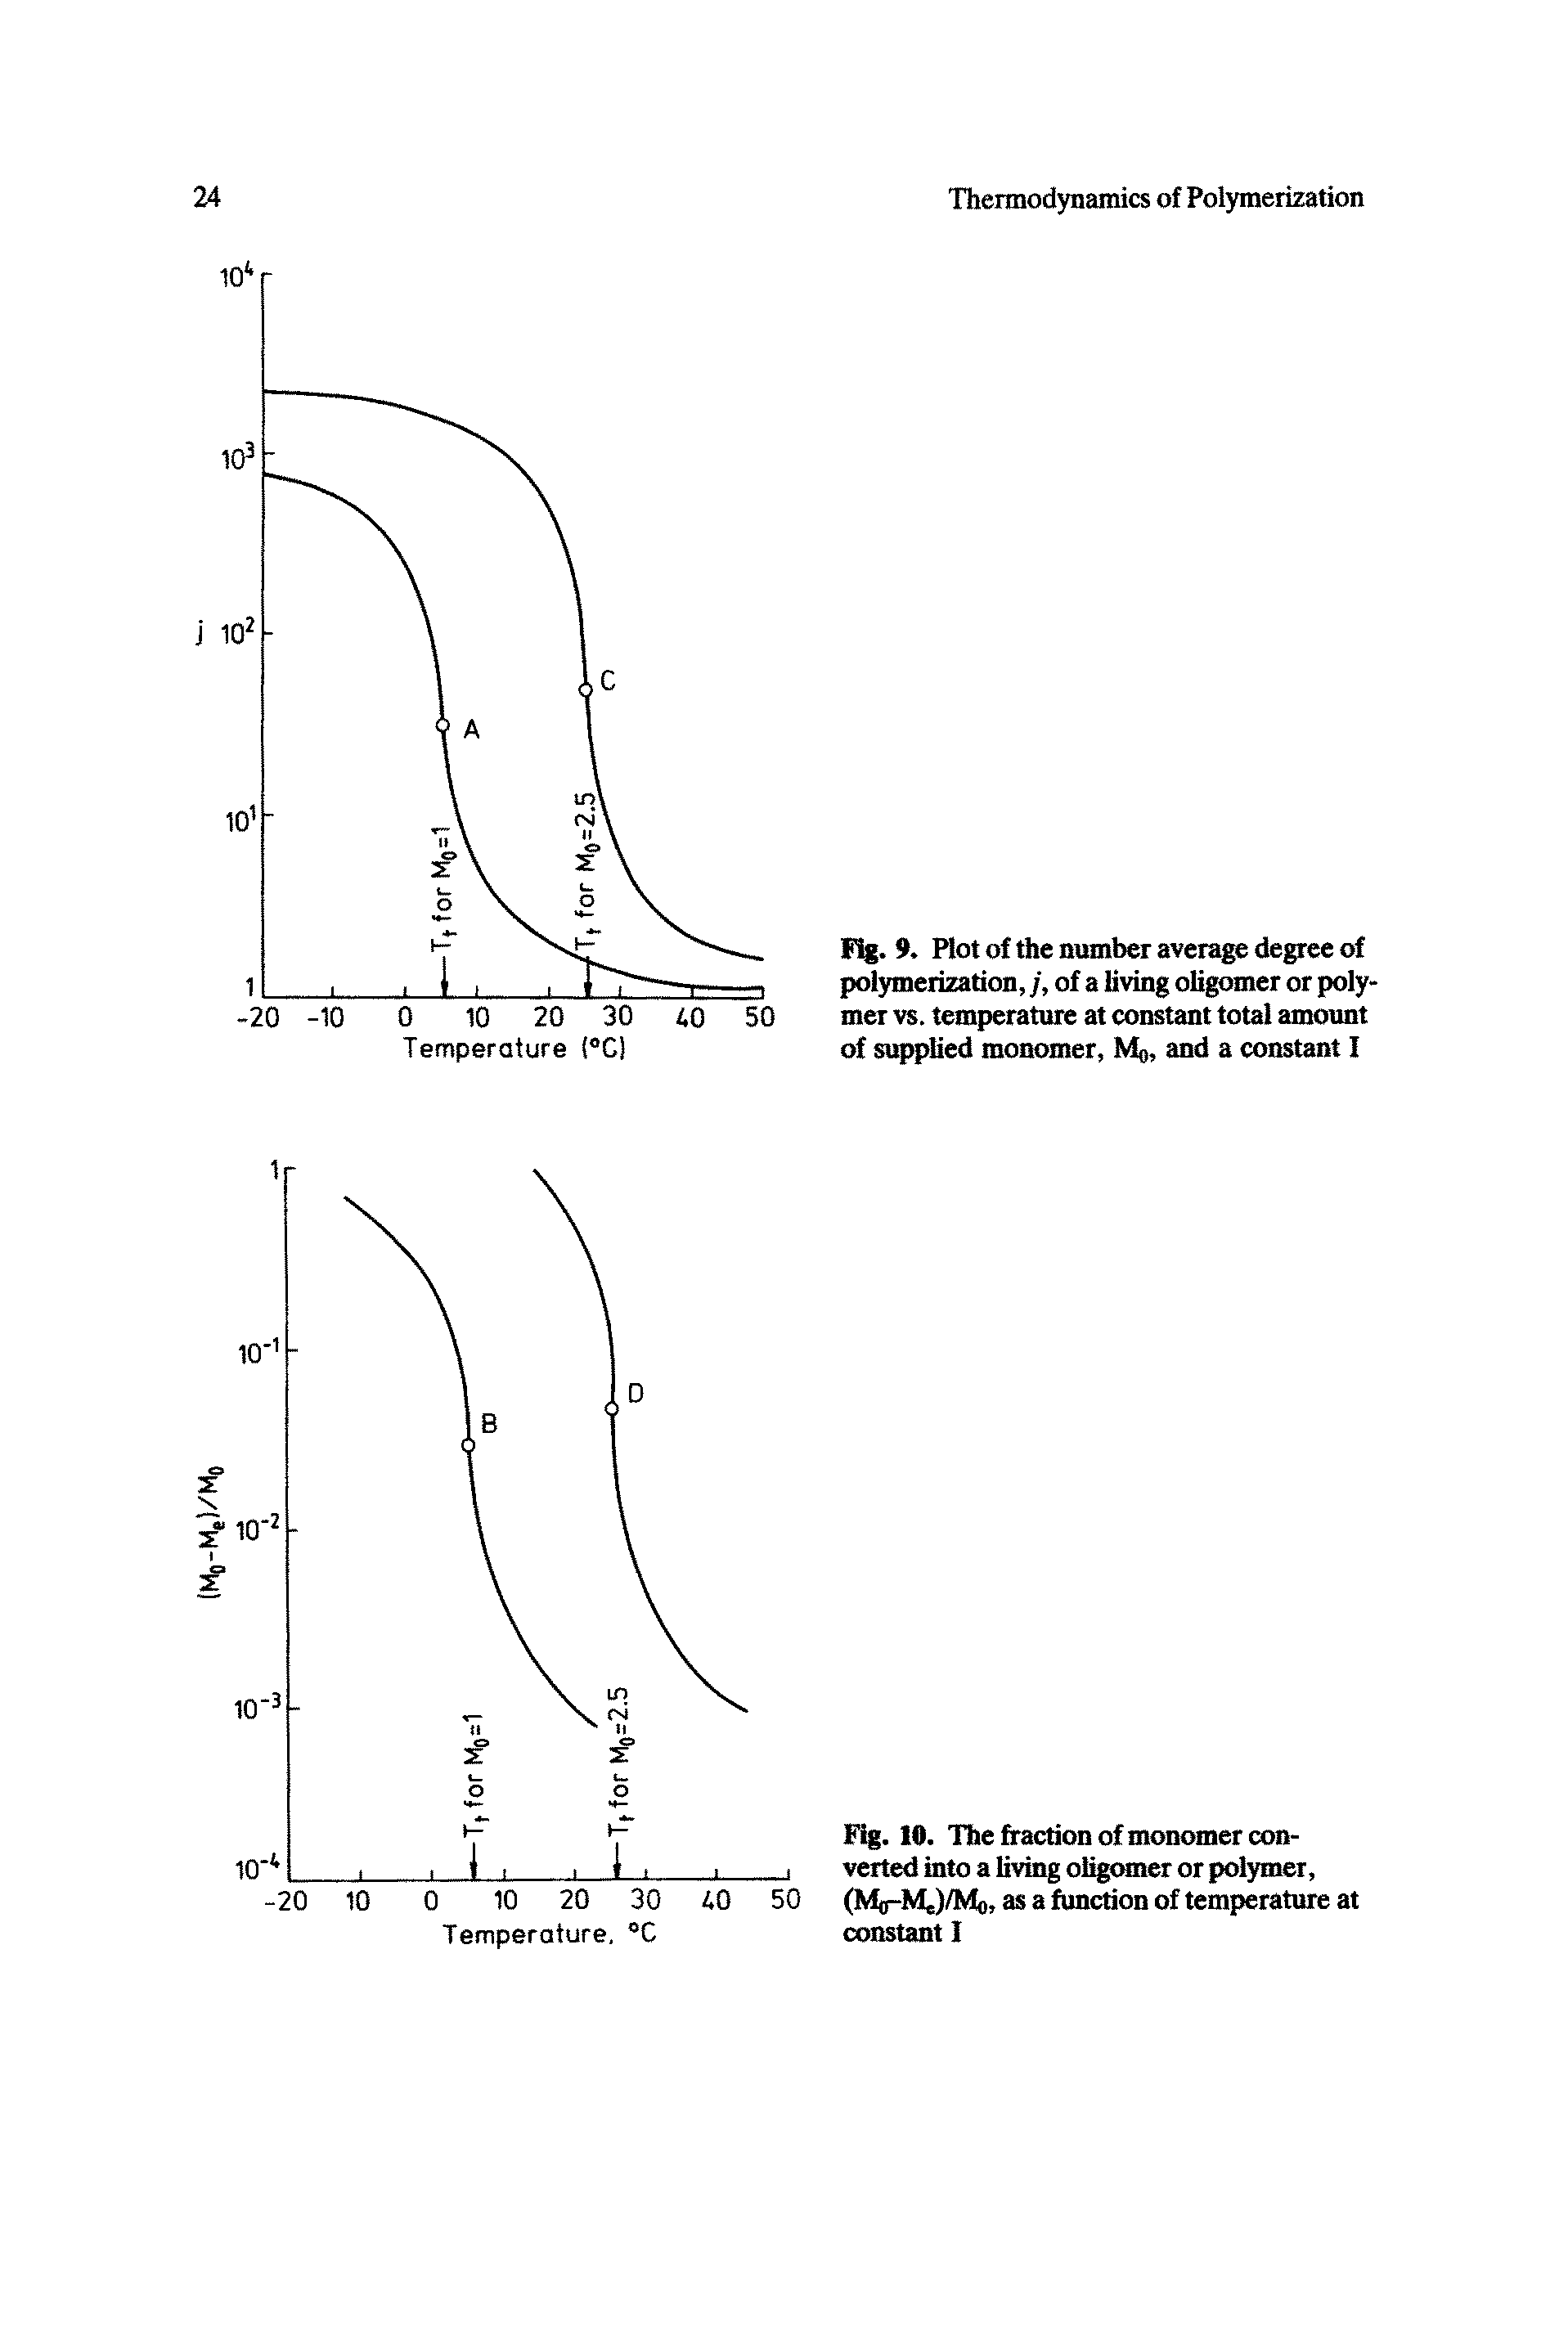 Fig. 9. Plot of the number average degree of polymerization, j, of a living oligomer or polymer vs. temperature at constant total amount of supplied monomer, Mo, and a constant I...